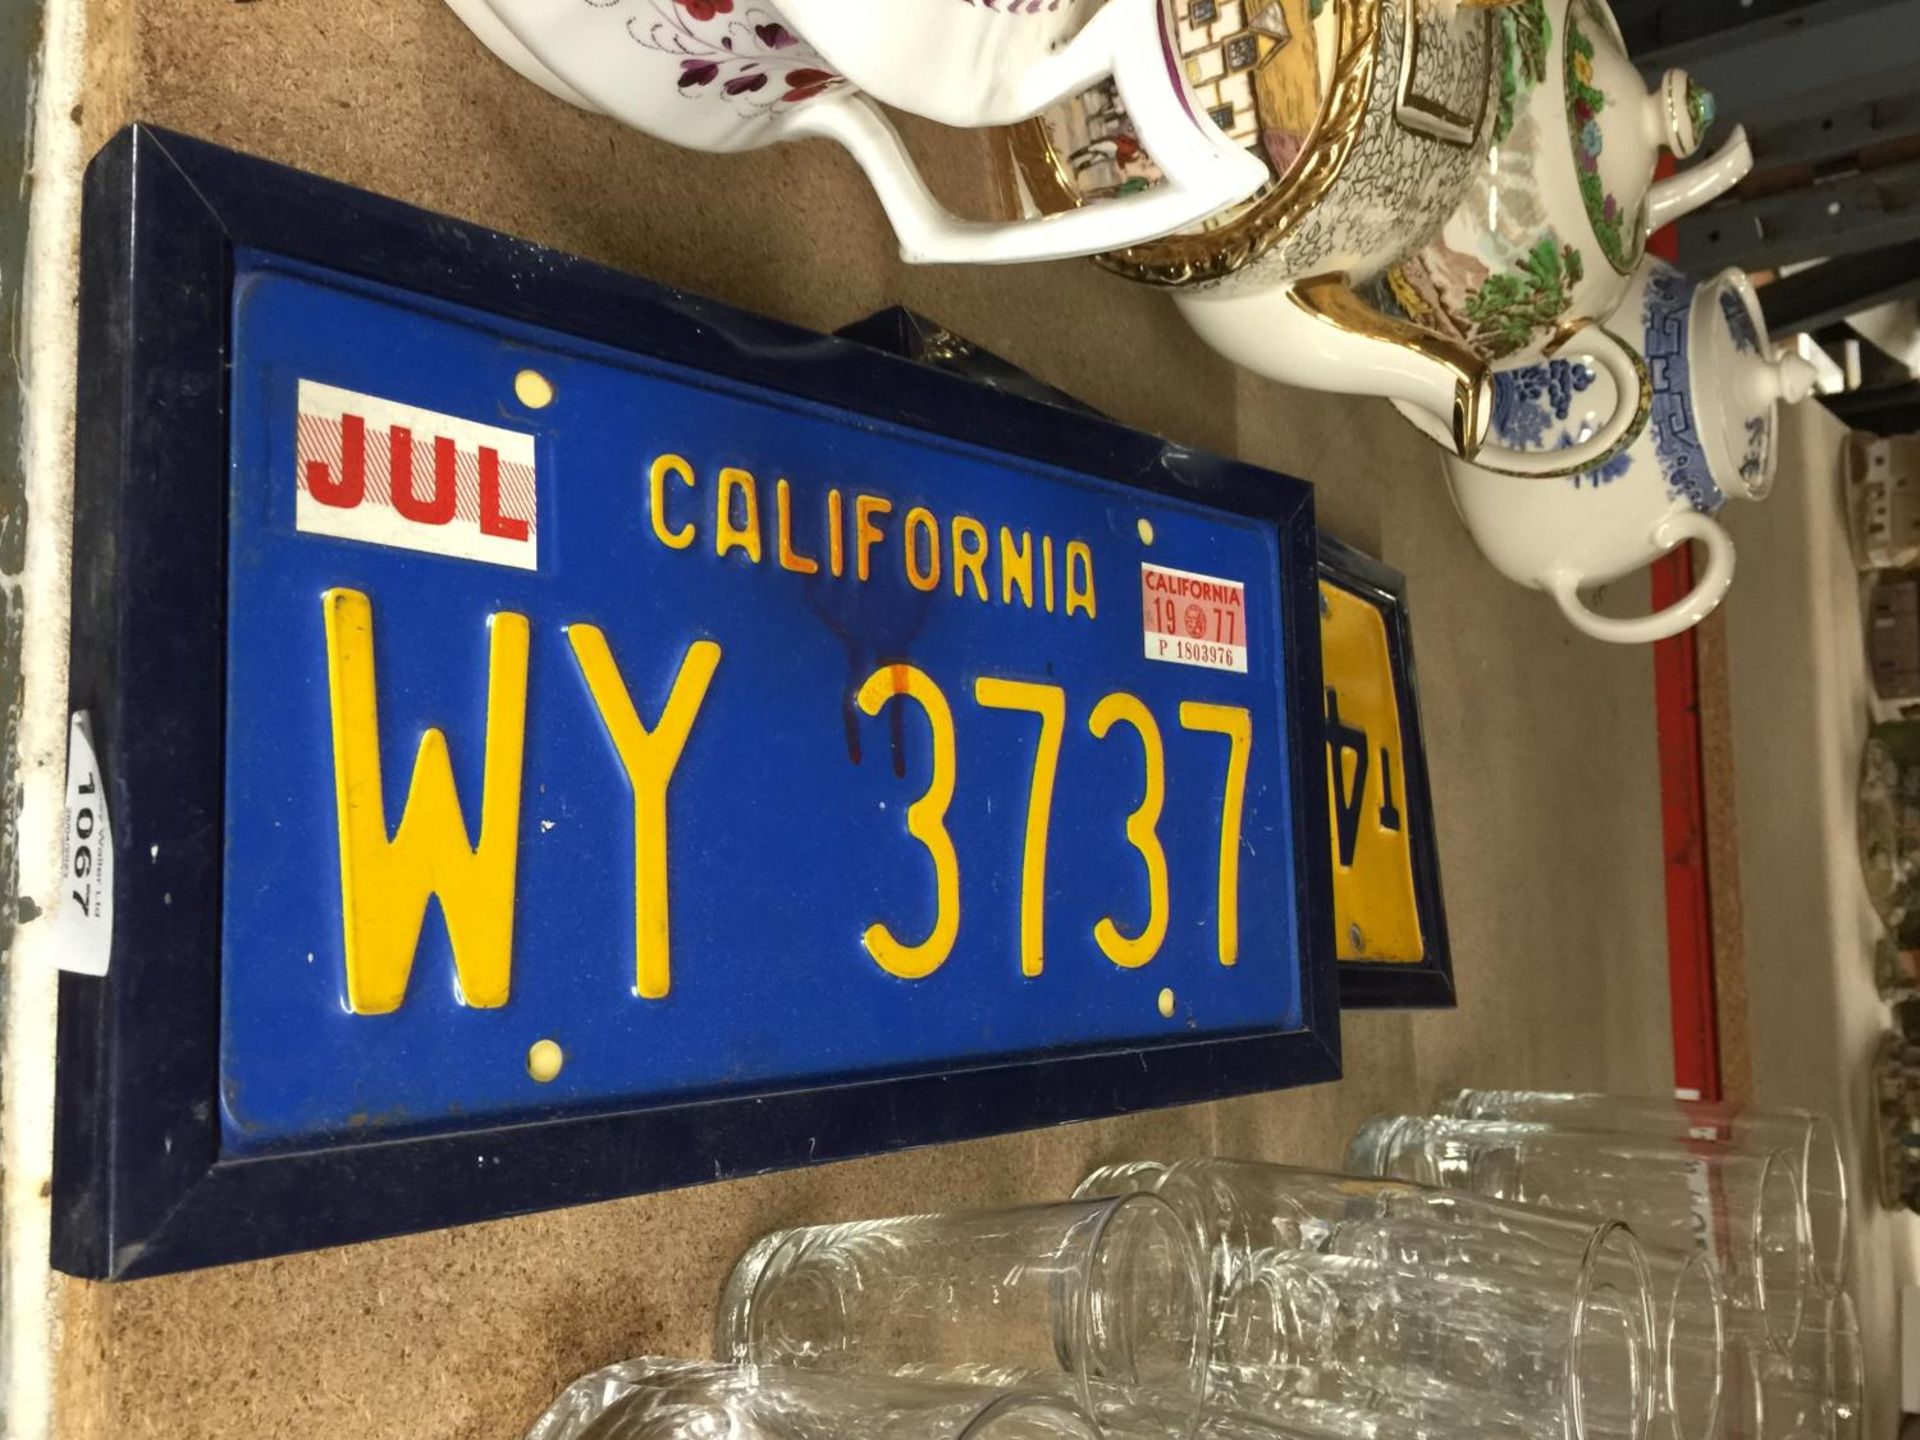 TWO VINTAGE AMERICAN CAR REGISTRATION PLATES - CALIFORNIA AND OREGON - IN FRAMES